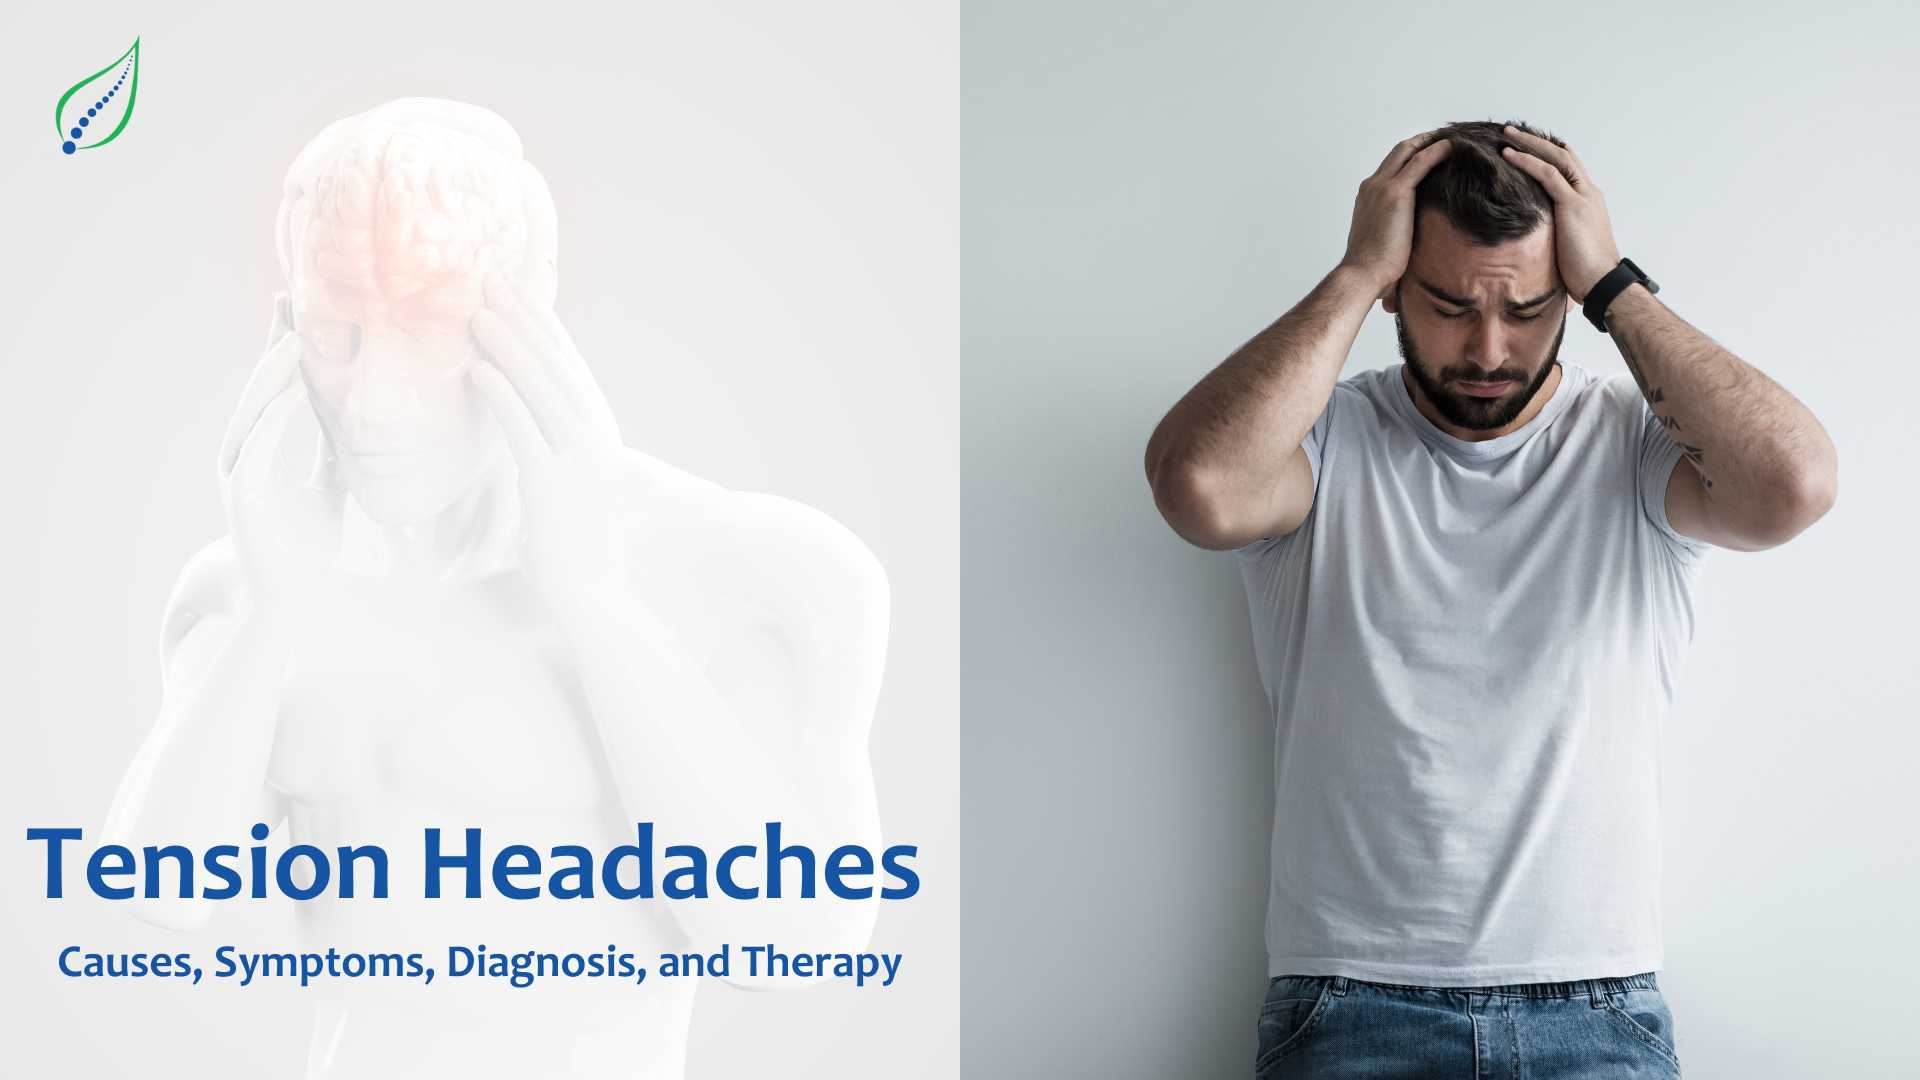 Tension Headaches: Causes, Symptoms, Diagnosis, and Therapy